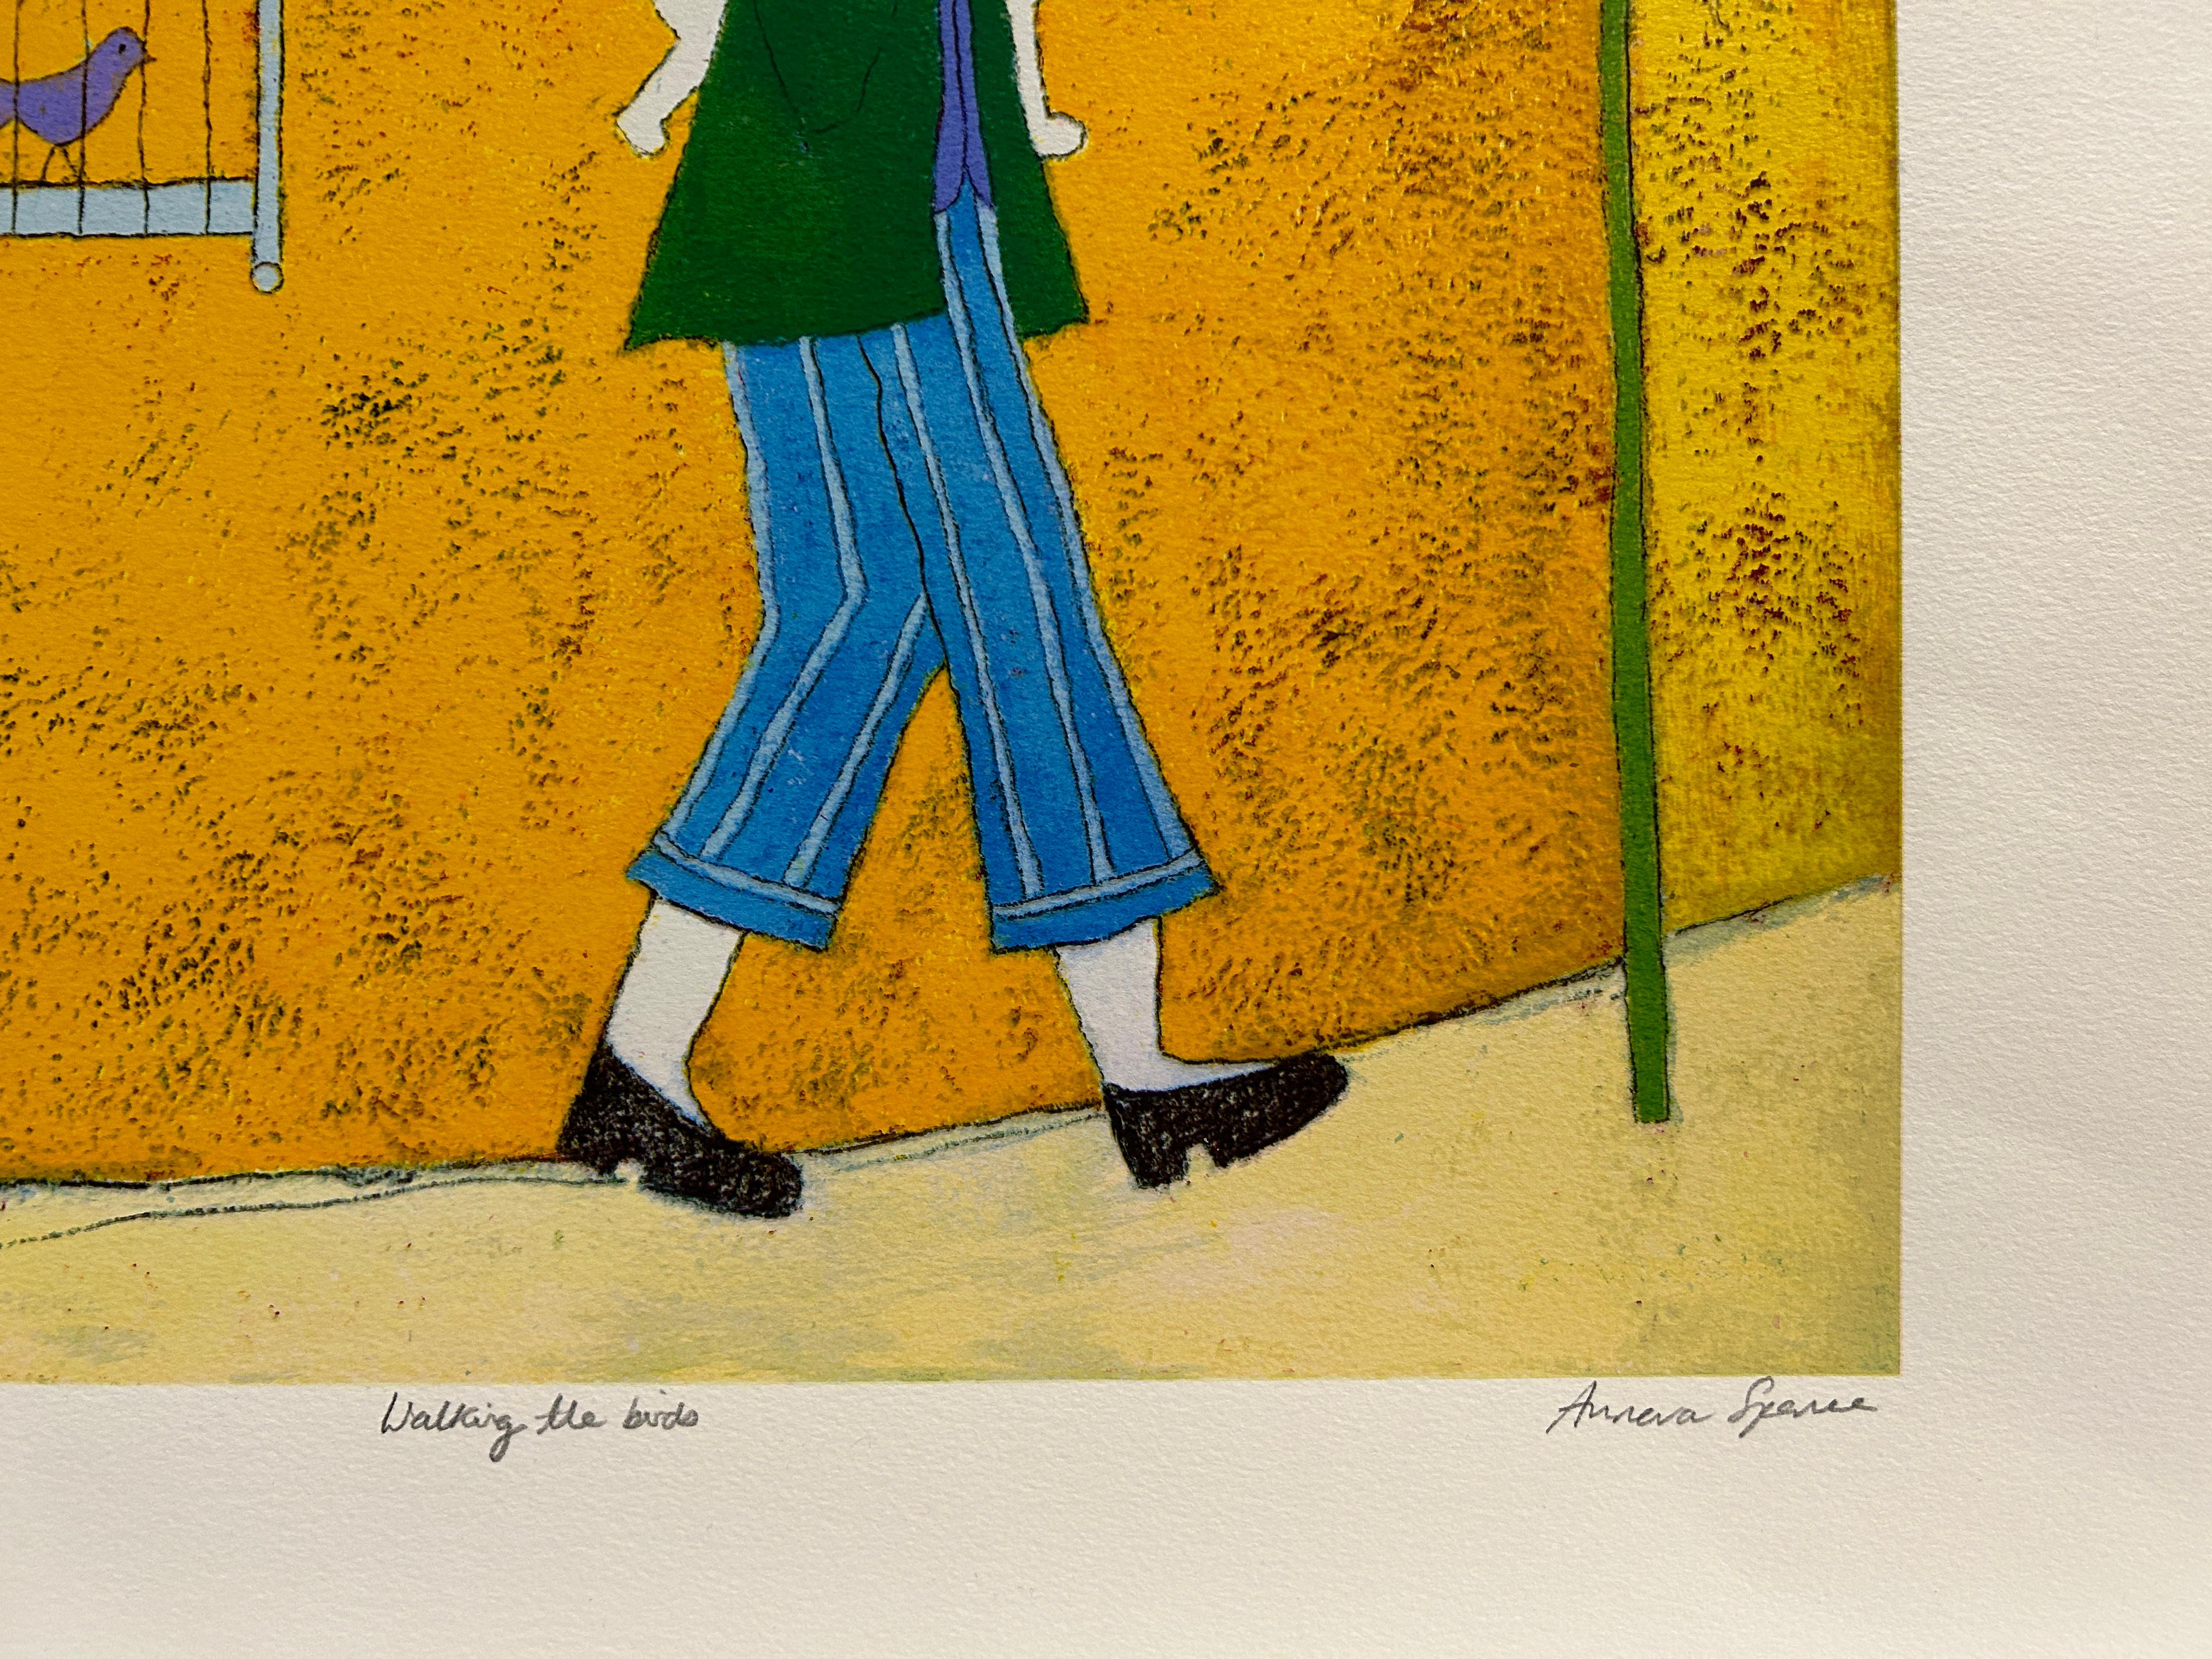 Walking the Birds - Print by Annora Spence